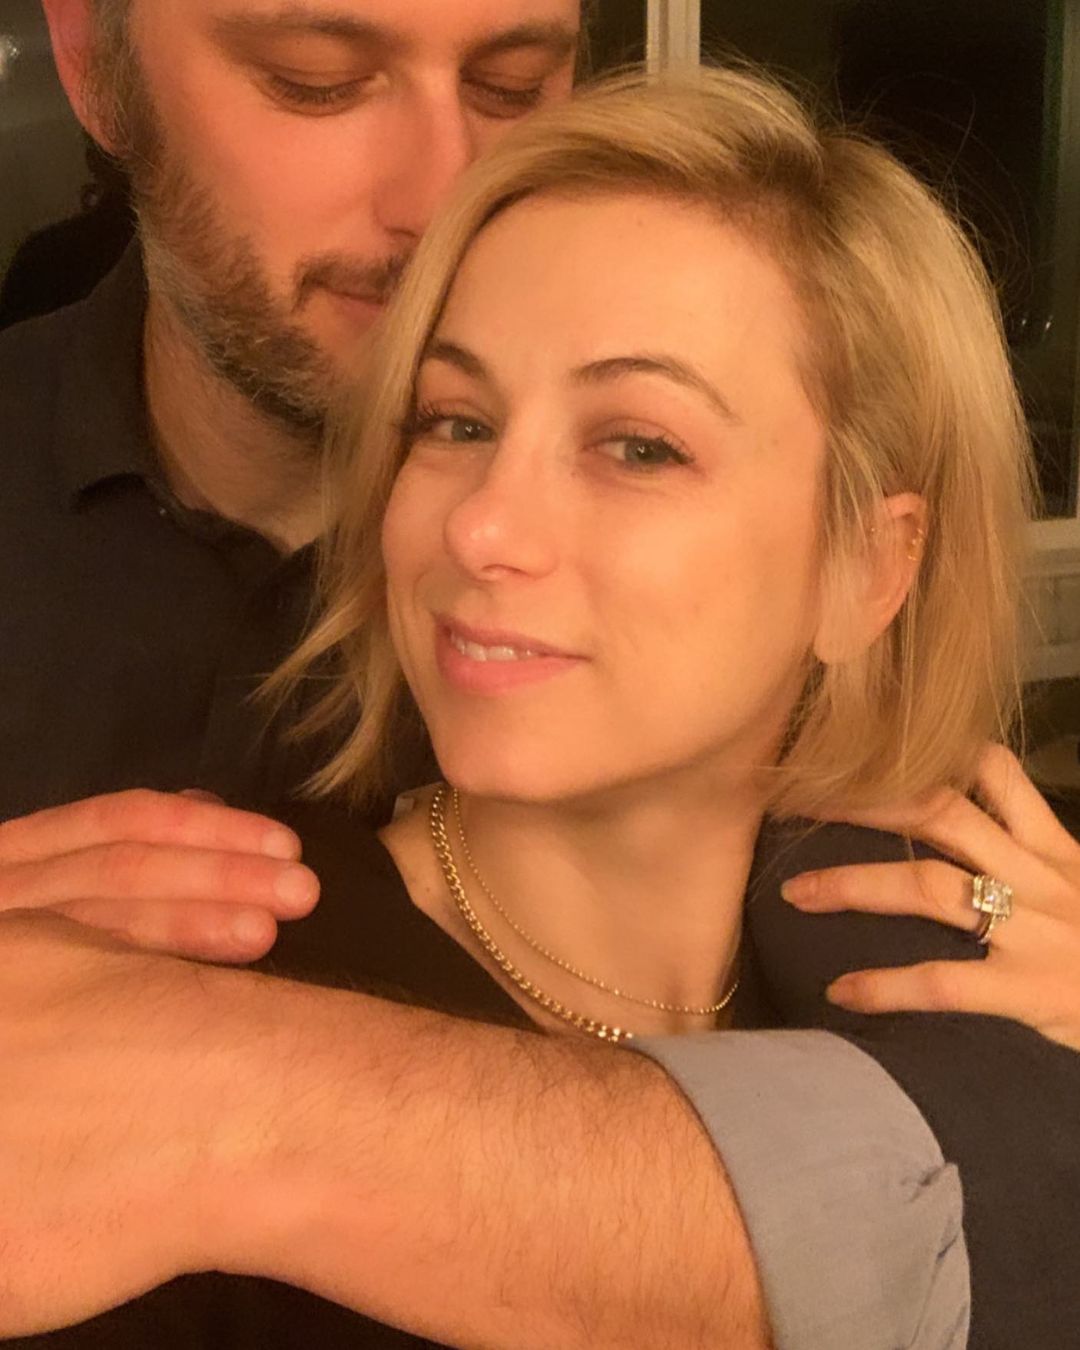 Iliza Shlesinger, wearing an emerald cut diamond engagement ring, gets embraced by Noah Galuten from the back